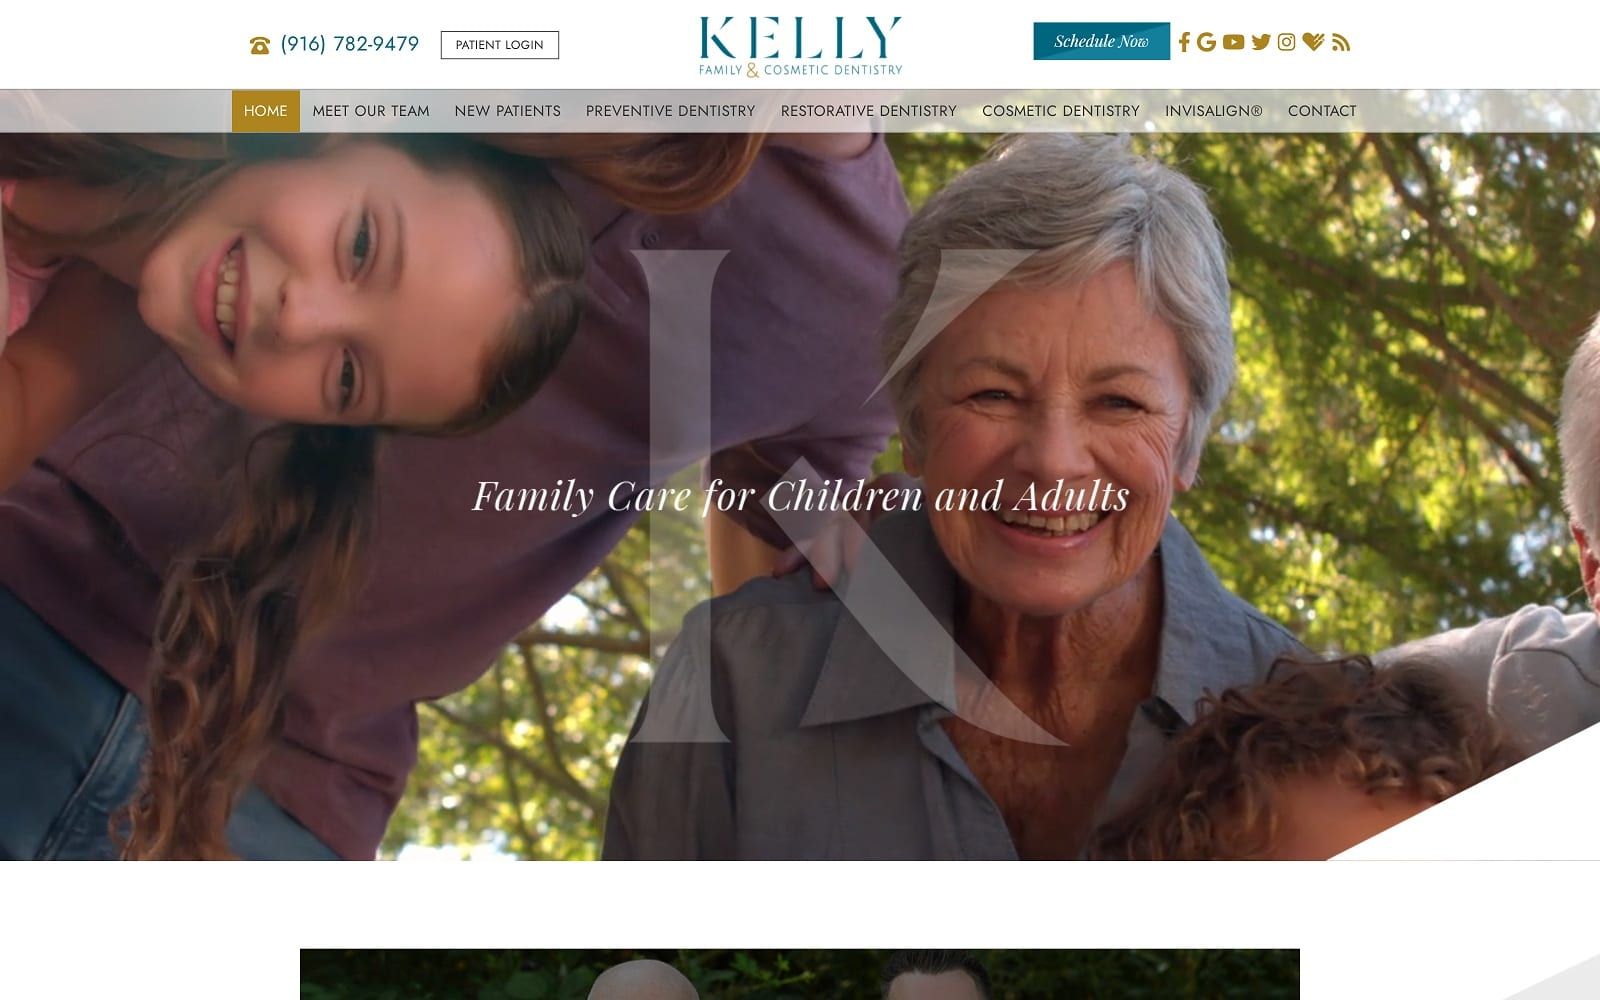 The screenshot of sidney d. Kelly, dmd family and cosmetic dentistry kellyfamilydentist. Com website